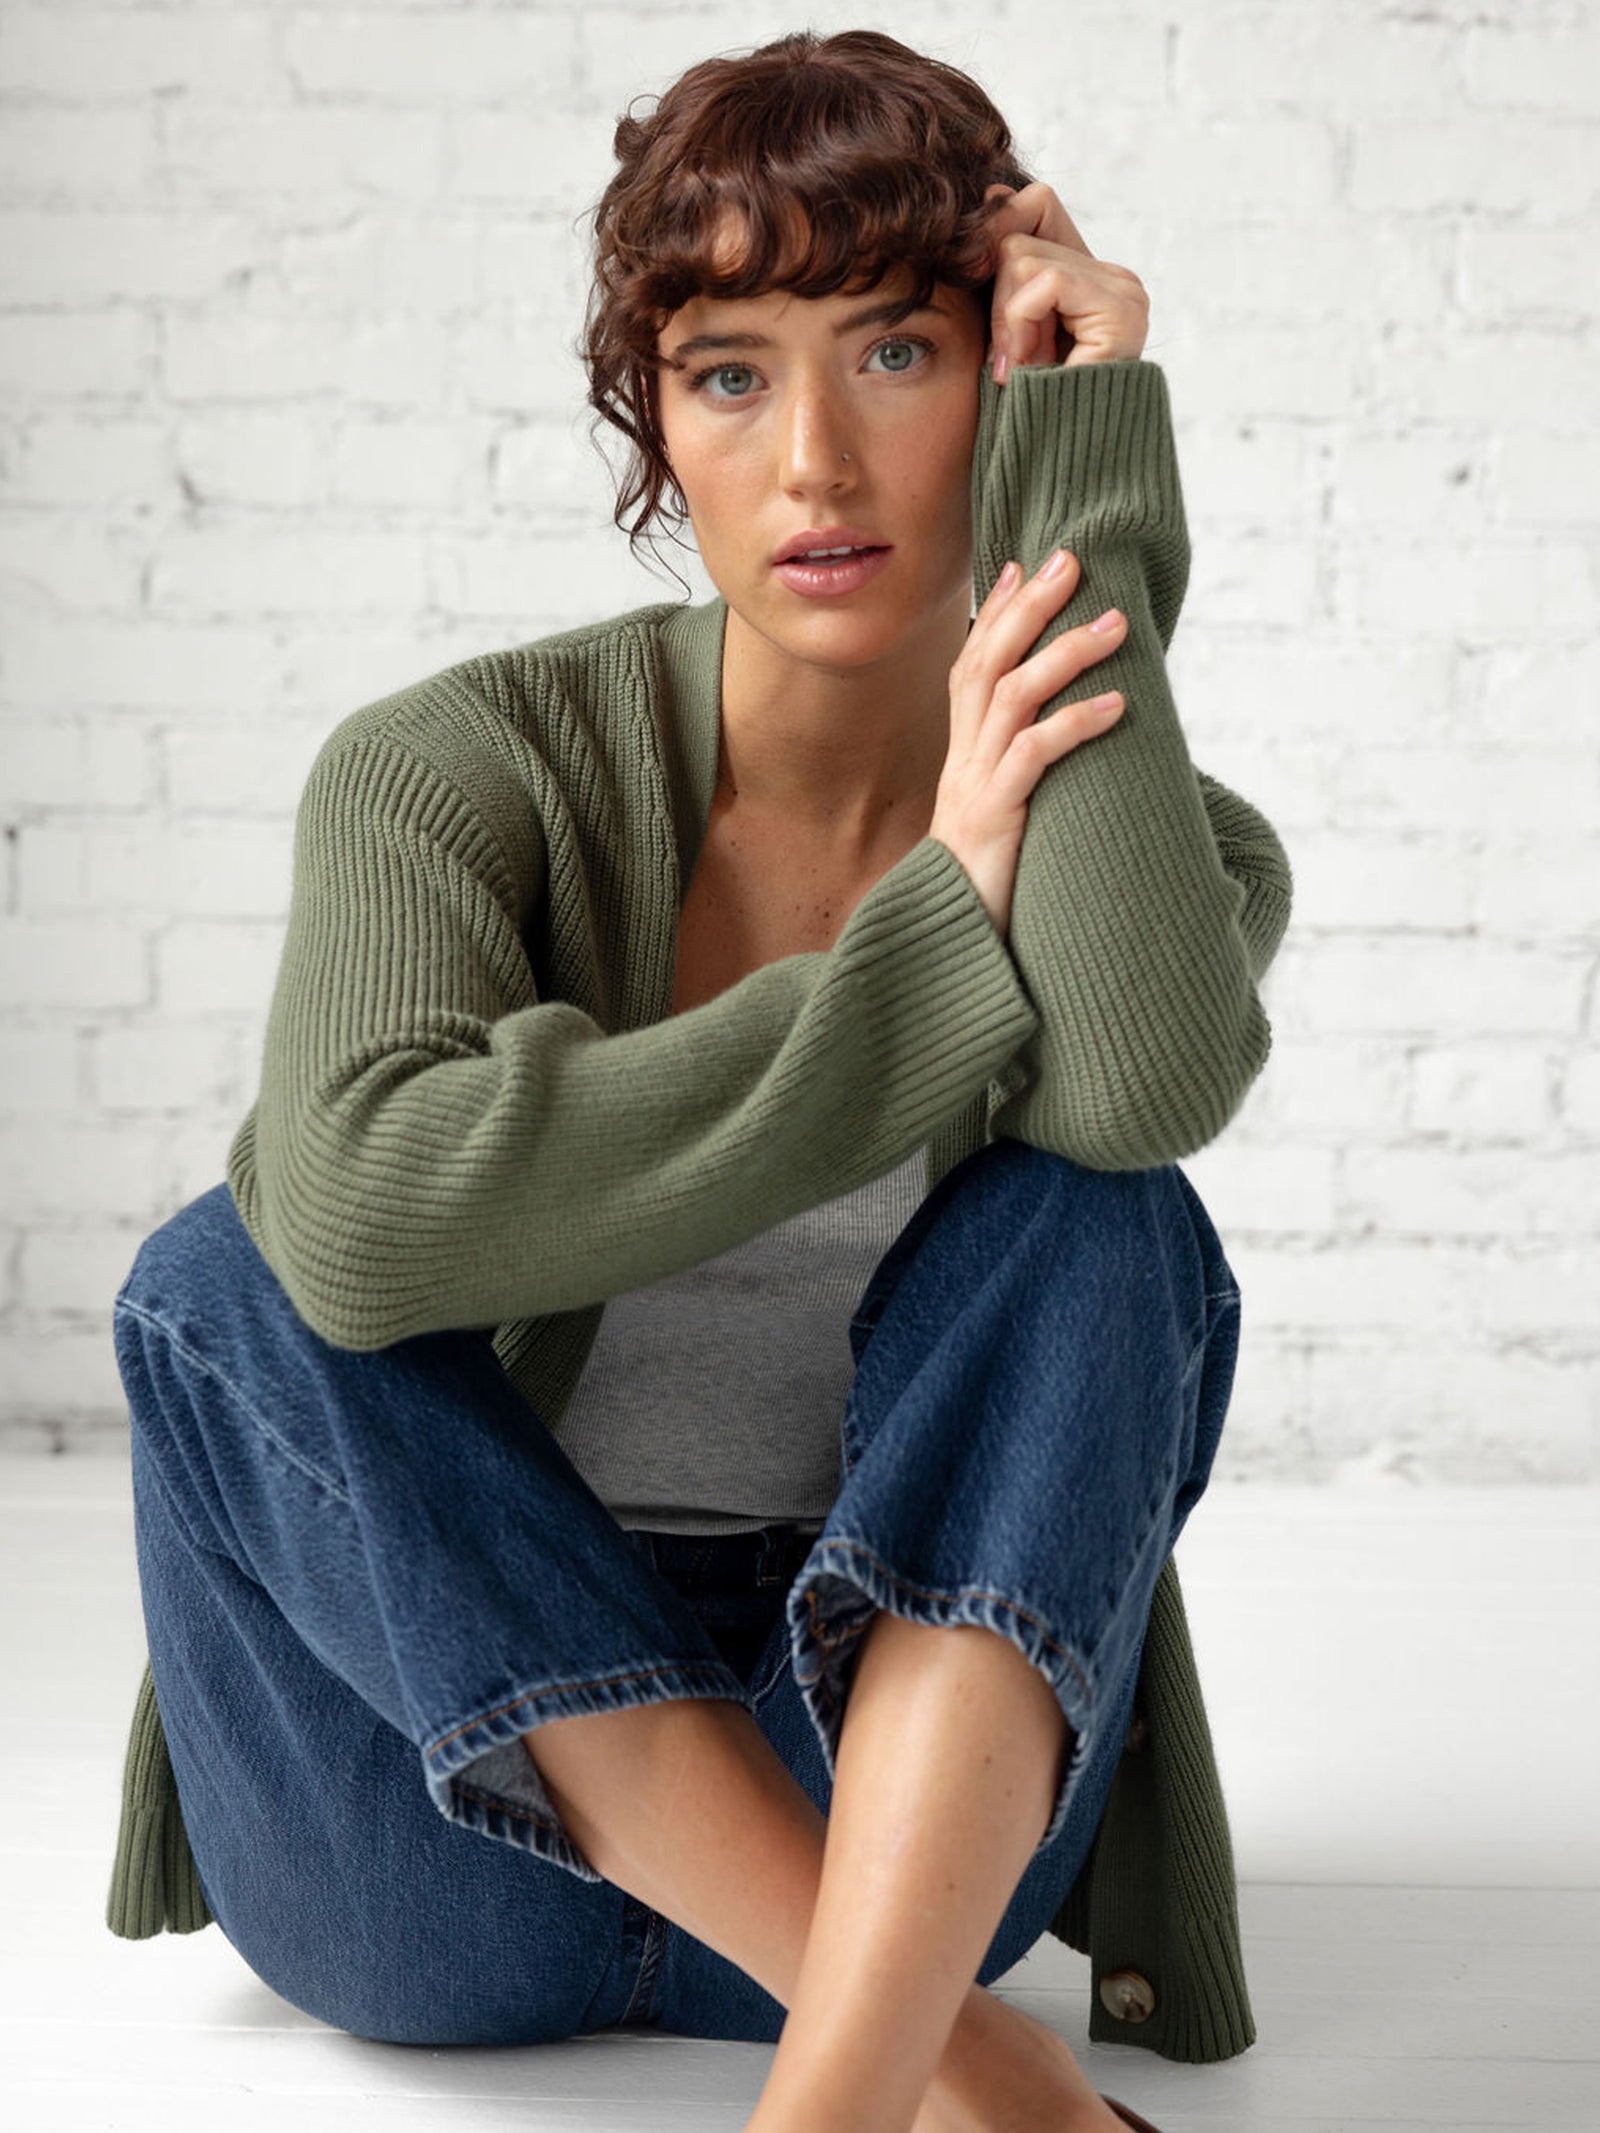 Woman sitting on floor in jeans and juniper cardigan 